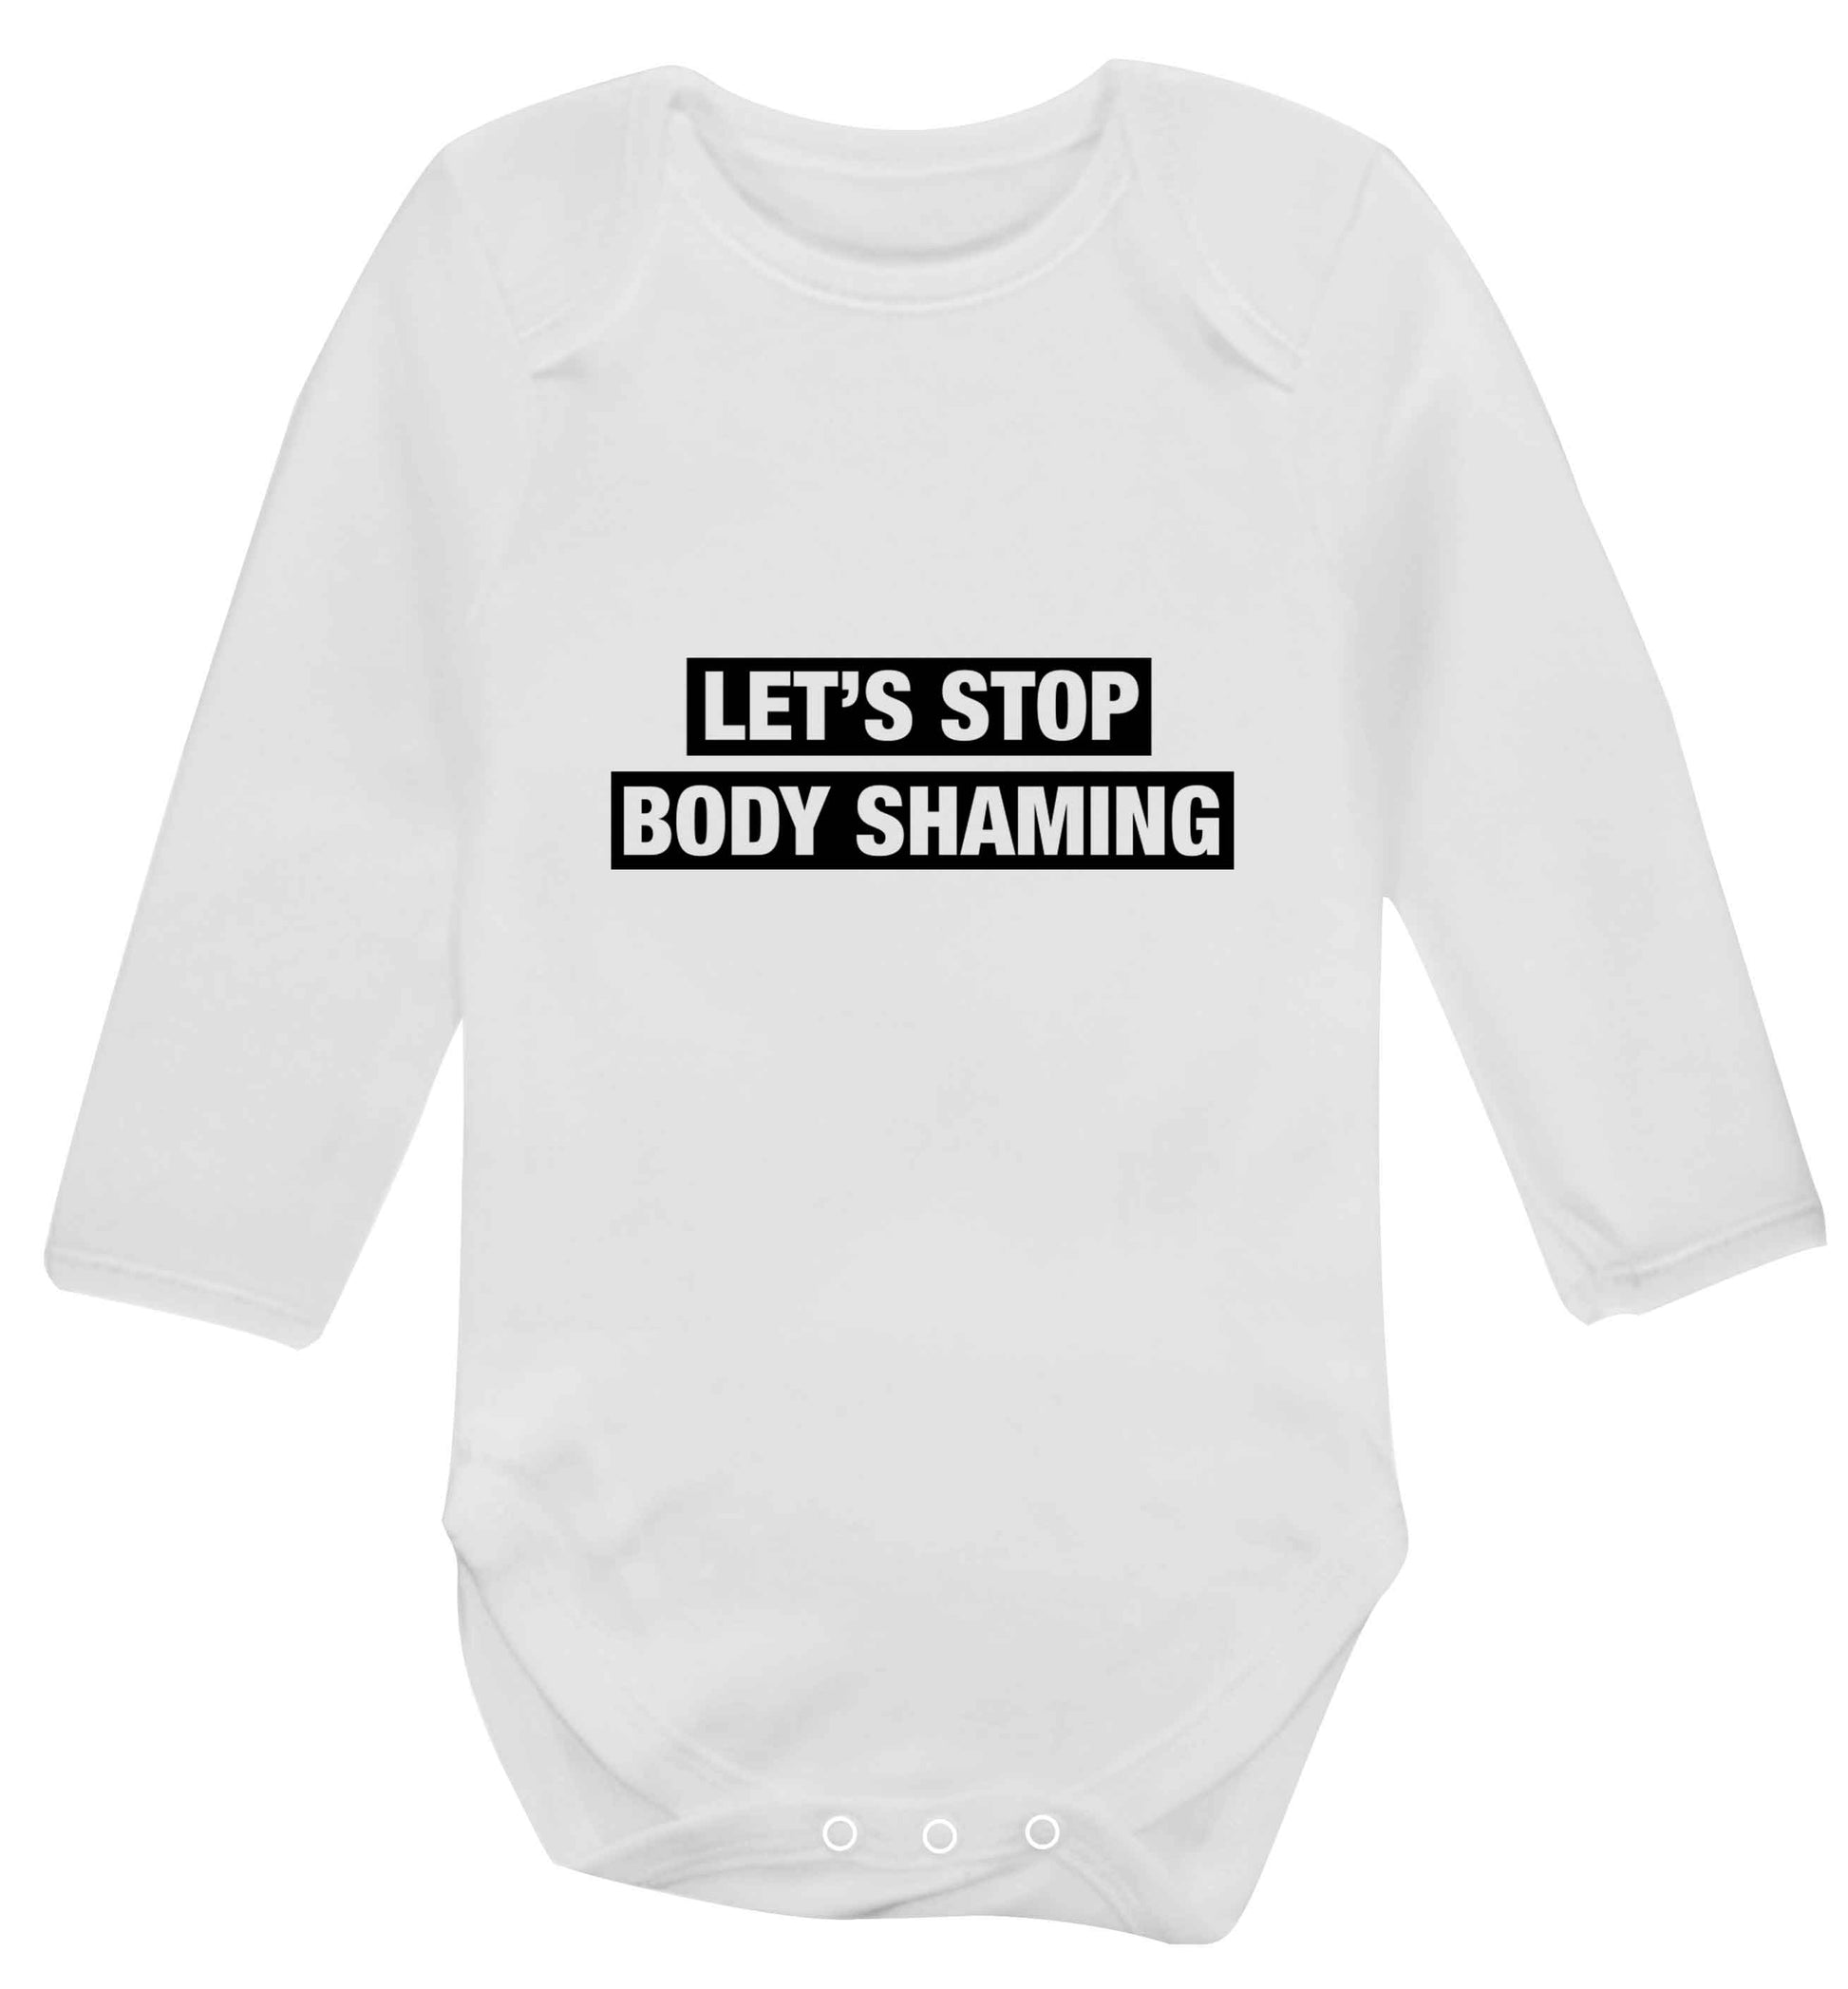 Let's stop body shaming baby vest long sleeved white 6-12 months